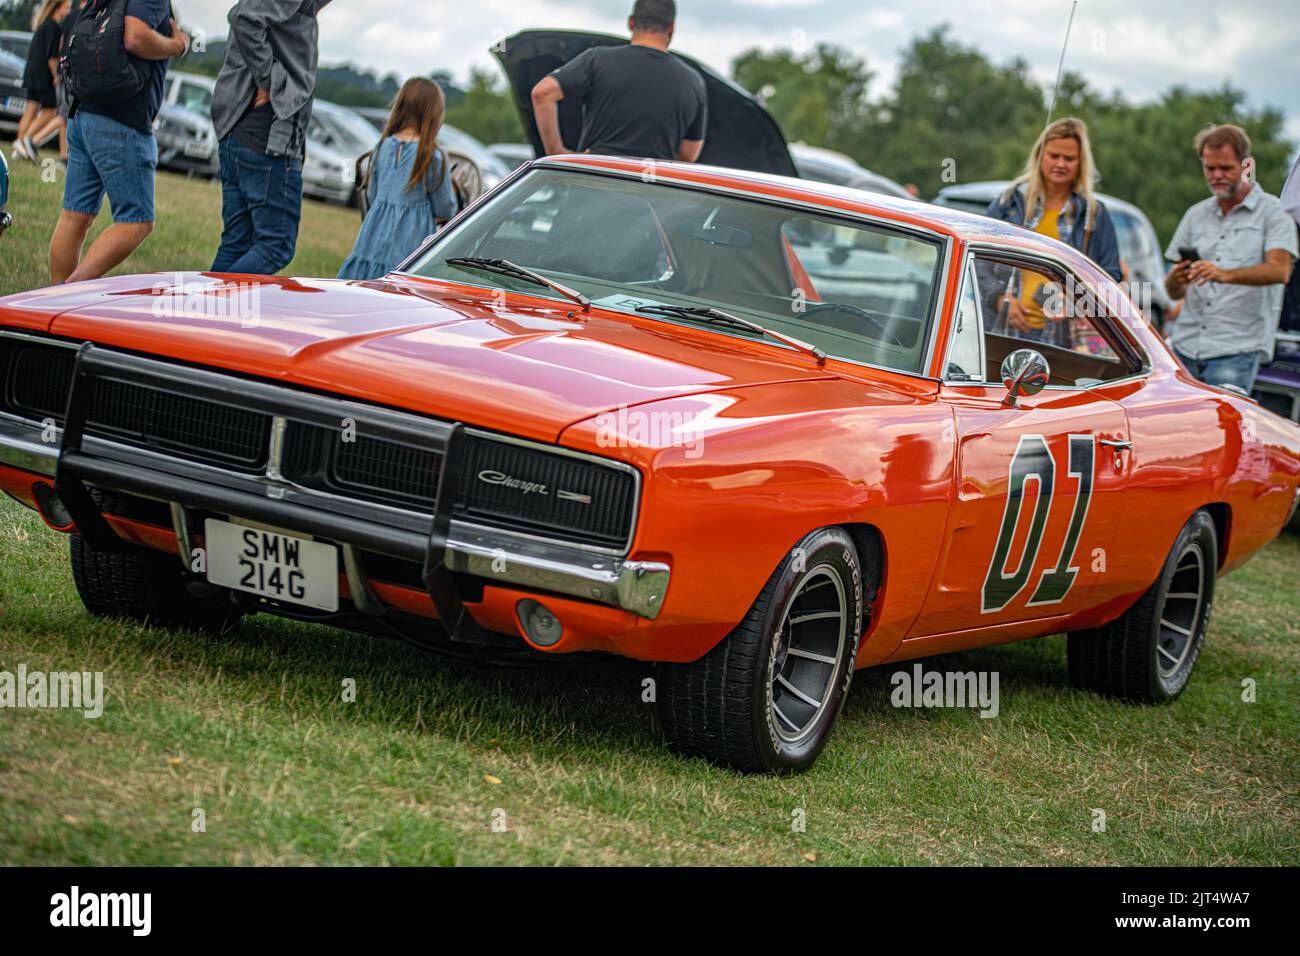 Static and Racing Images from the Us USA Auto show at Oulton Park Raceway Cheshire Including the Dukes of Hazard and Days Of Thunder Stock Photo